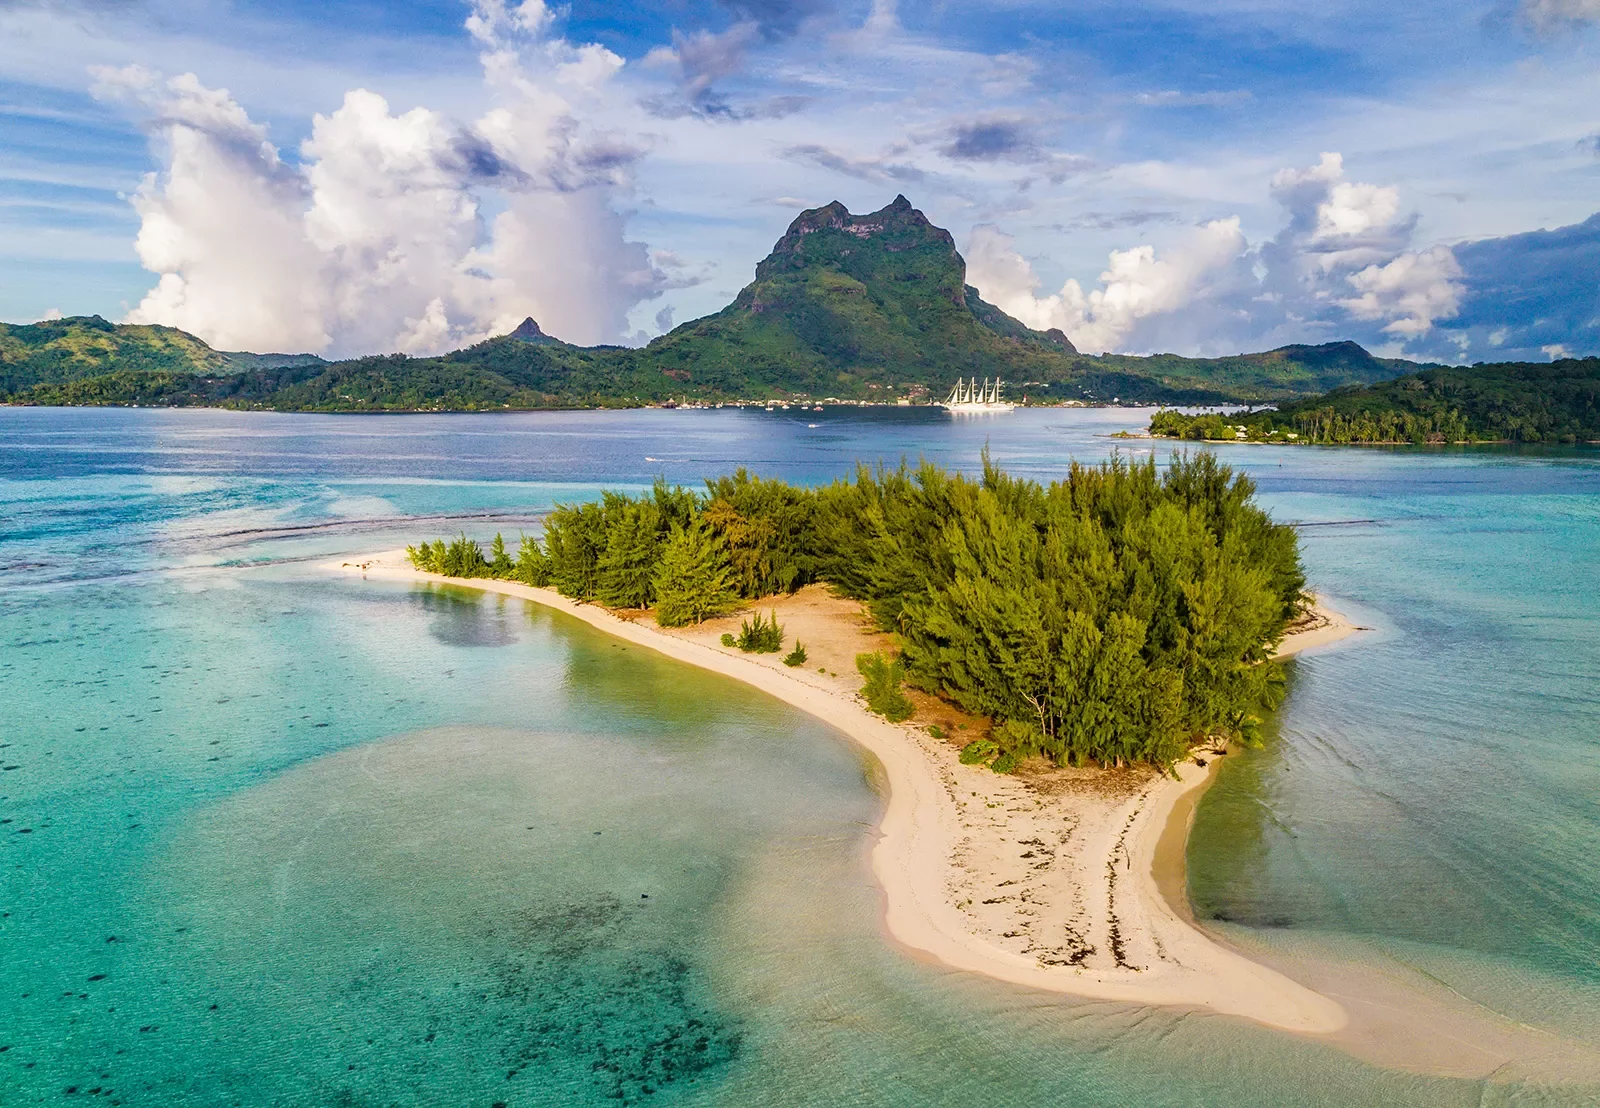 Islands and mountains in Tahiti